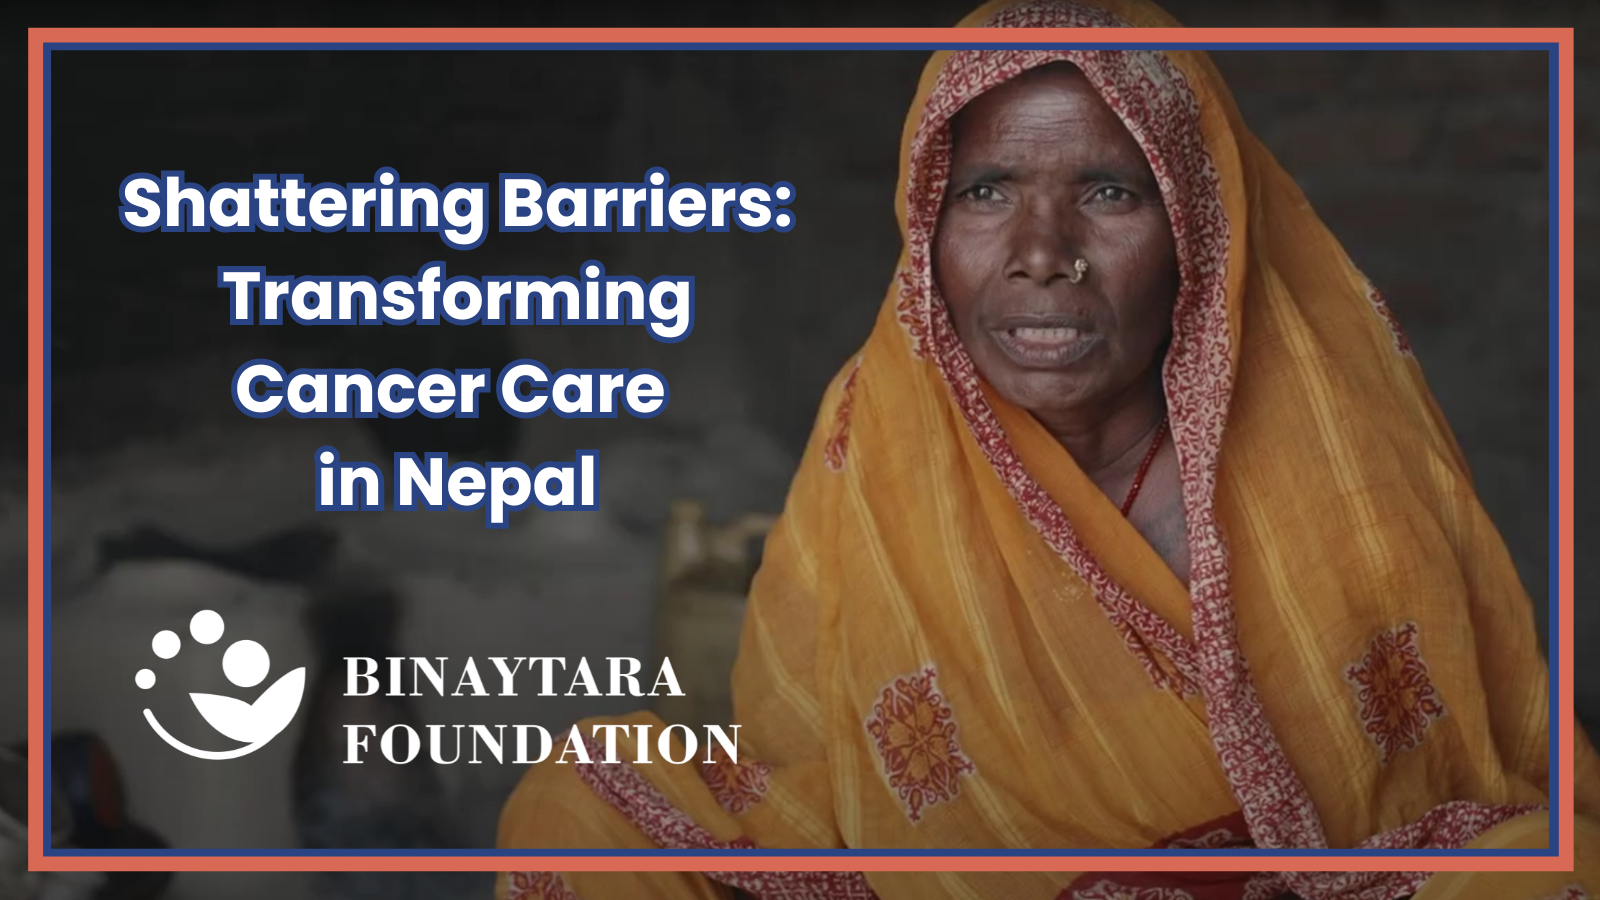 Shattering Barriers: Transforming Cancer Care in Nepal (Documentary Video)